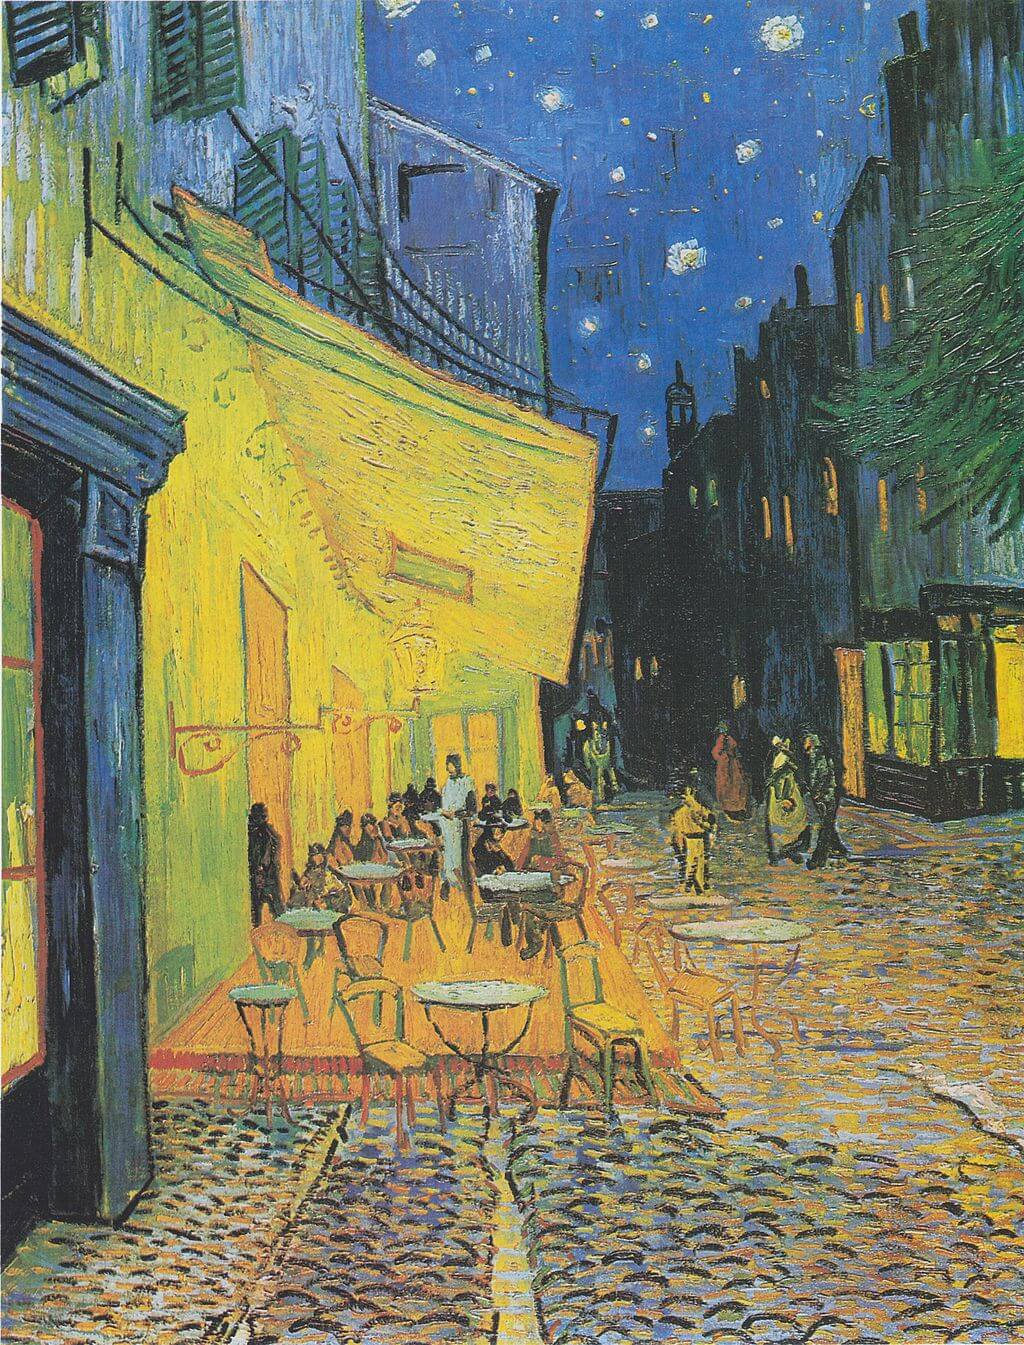 A discussion of The Starry Night by Vincent van Gogh